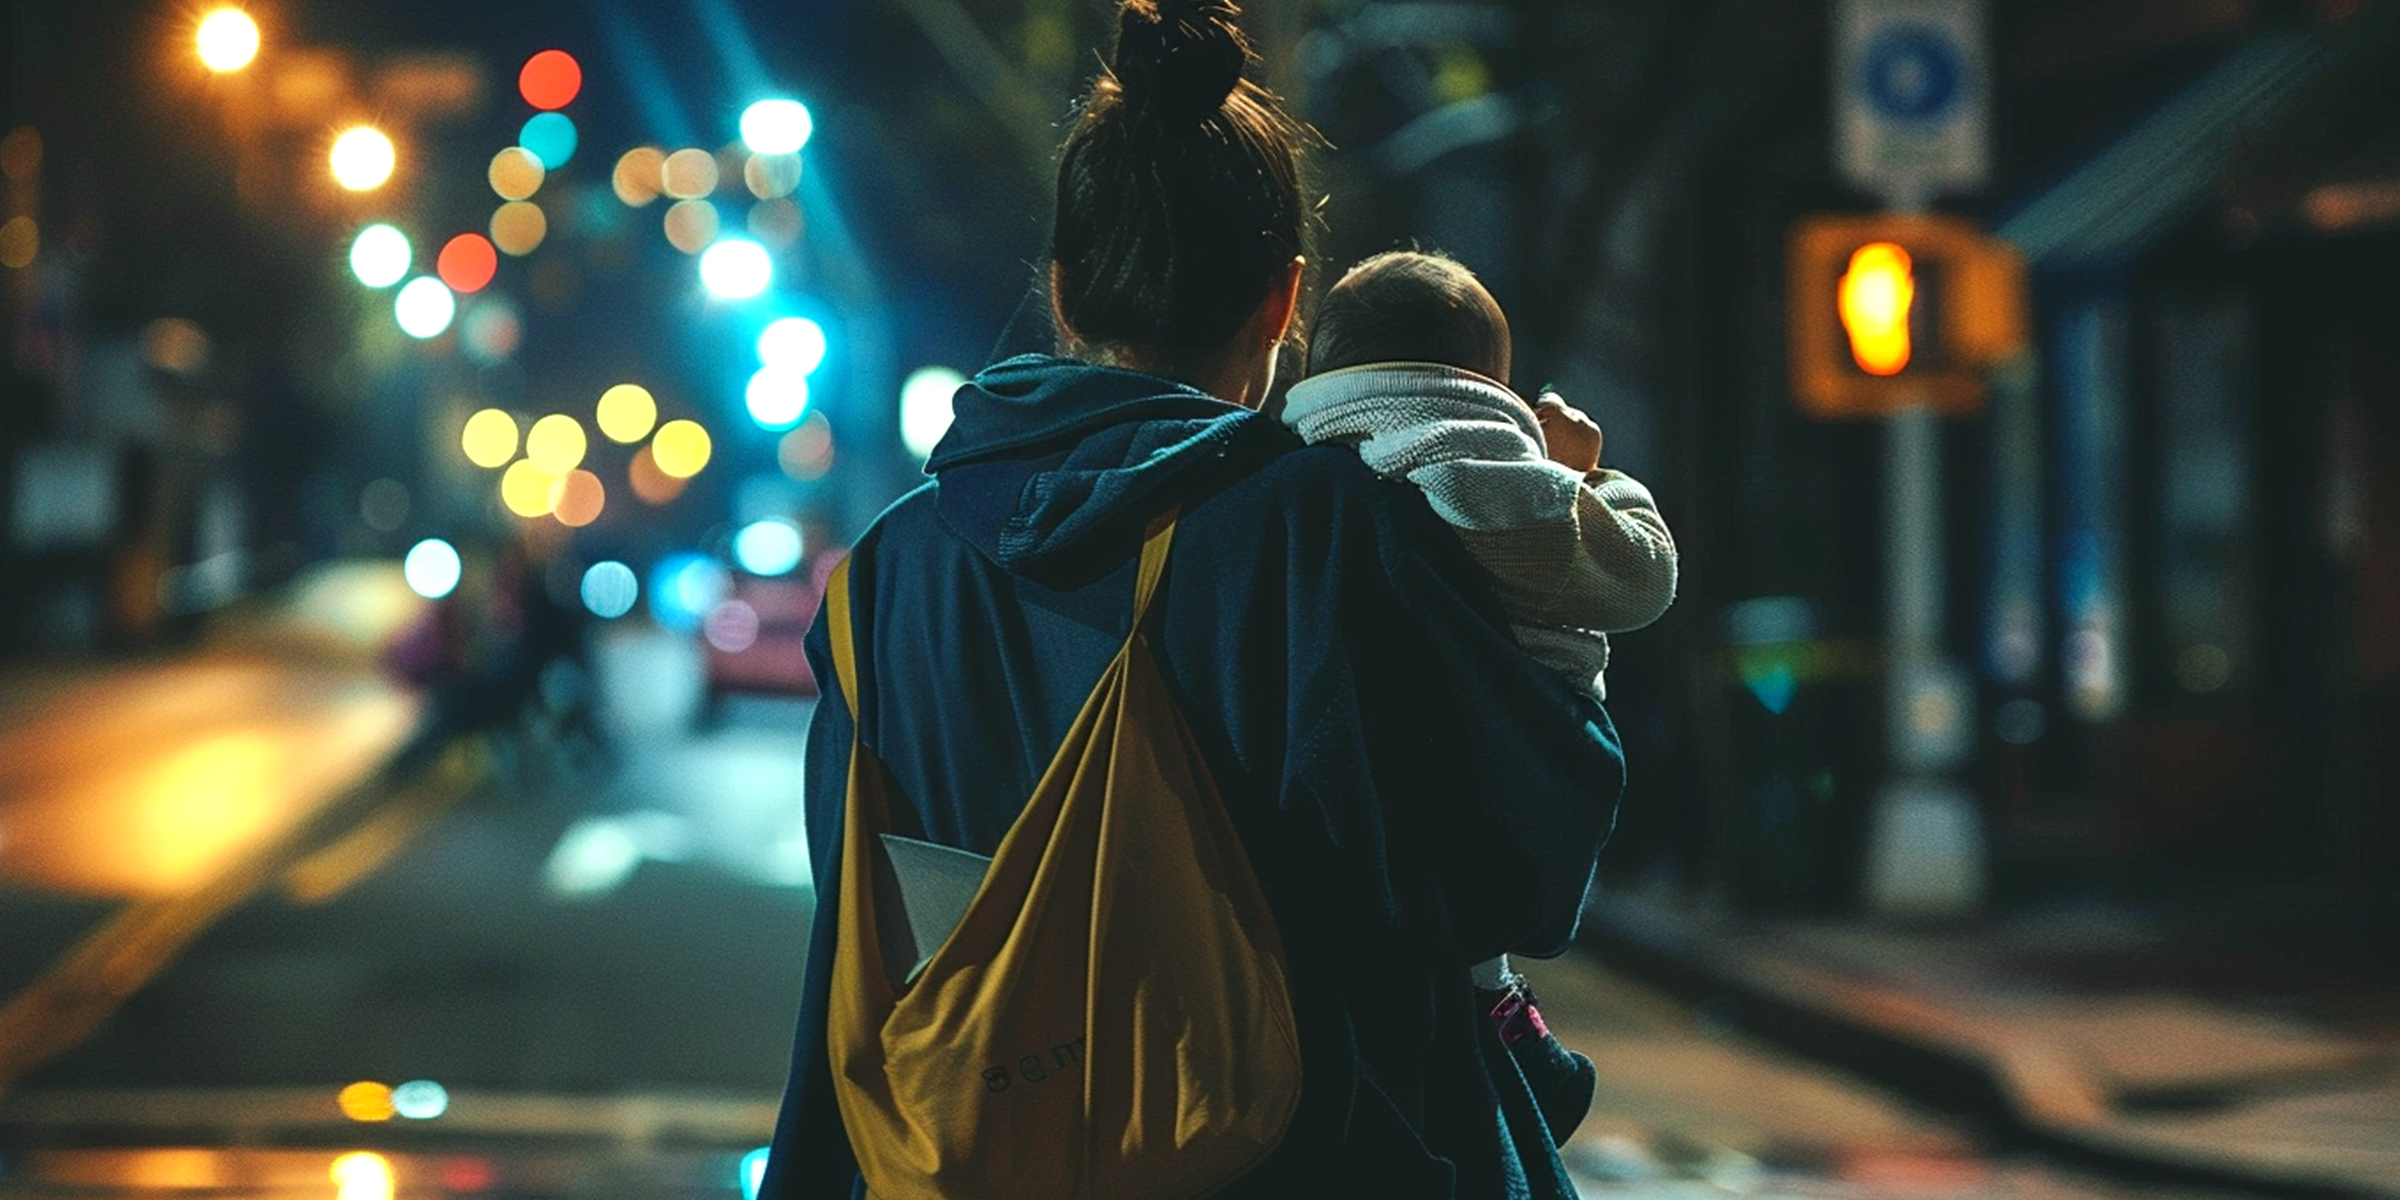 A woman with her little son on the road at night | Source: Amomama